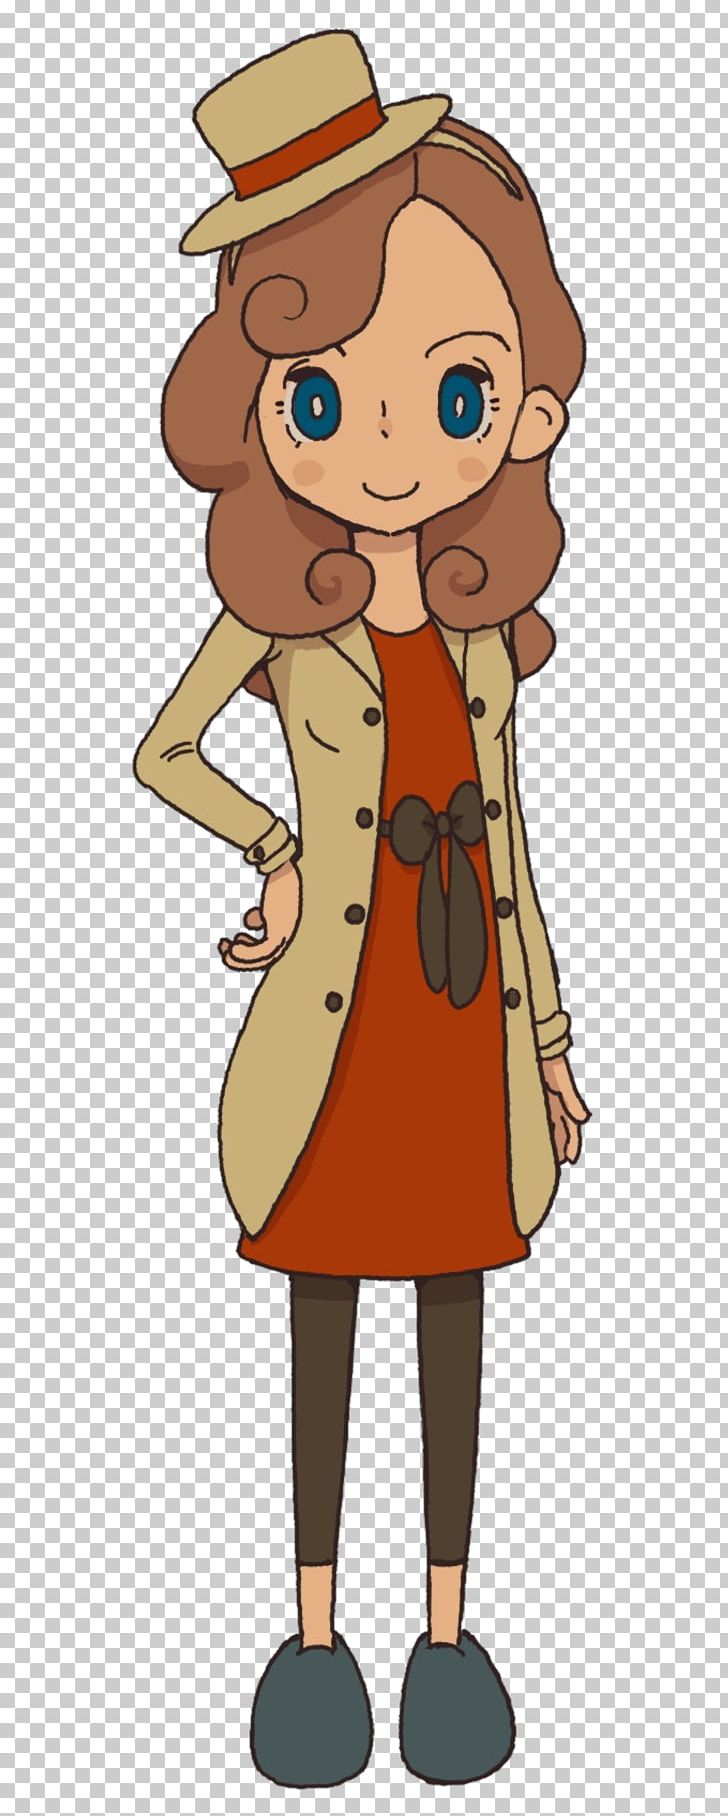 Layton's Mystery Journey: Katrielle And The Millionaires' Conspiracy Professor Hershel Layton Professor Layton And The Curious Village Professor Layton And The Azran Legacies Nintendo 3DS PNG, Clipart, Ace Attorney, Boy, Cartoon, Child, Fictional Character Free PNG Download